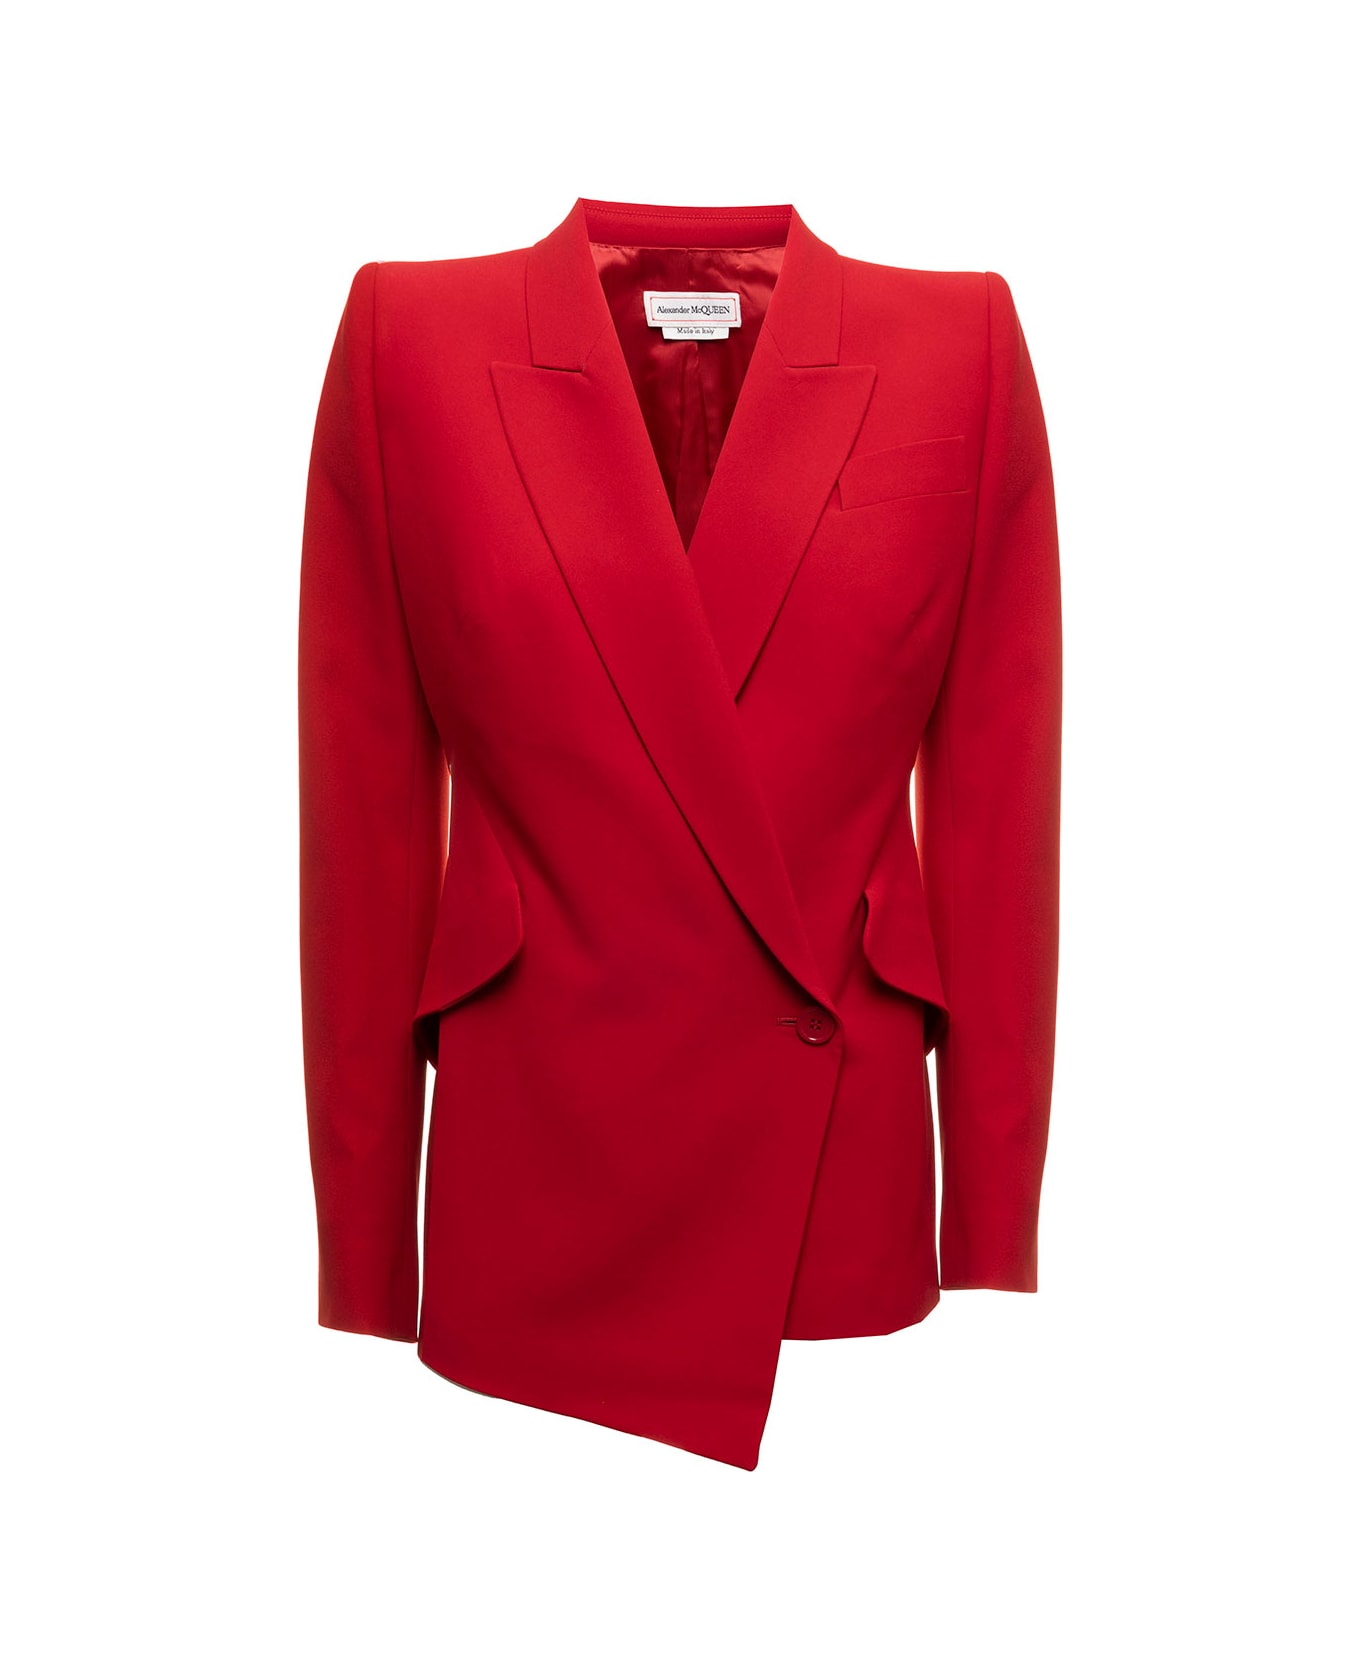 Alexander McQueen Asymmetrical Double-breasted  Red Wool  Jacket Alexander Mcqueen Woman - Red